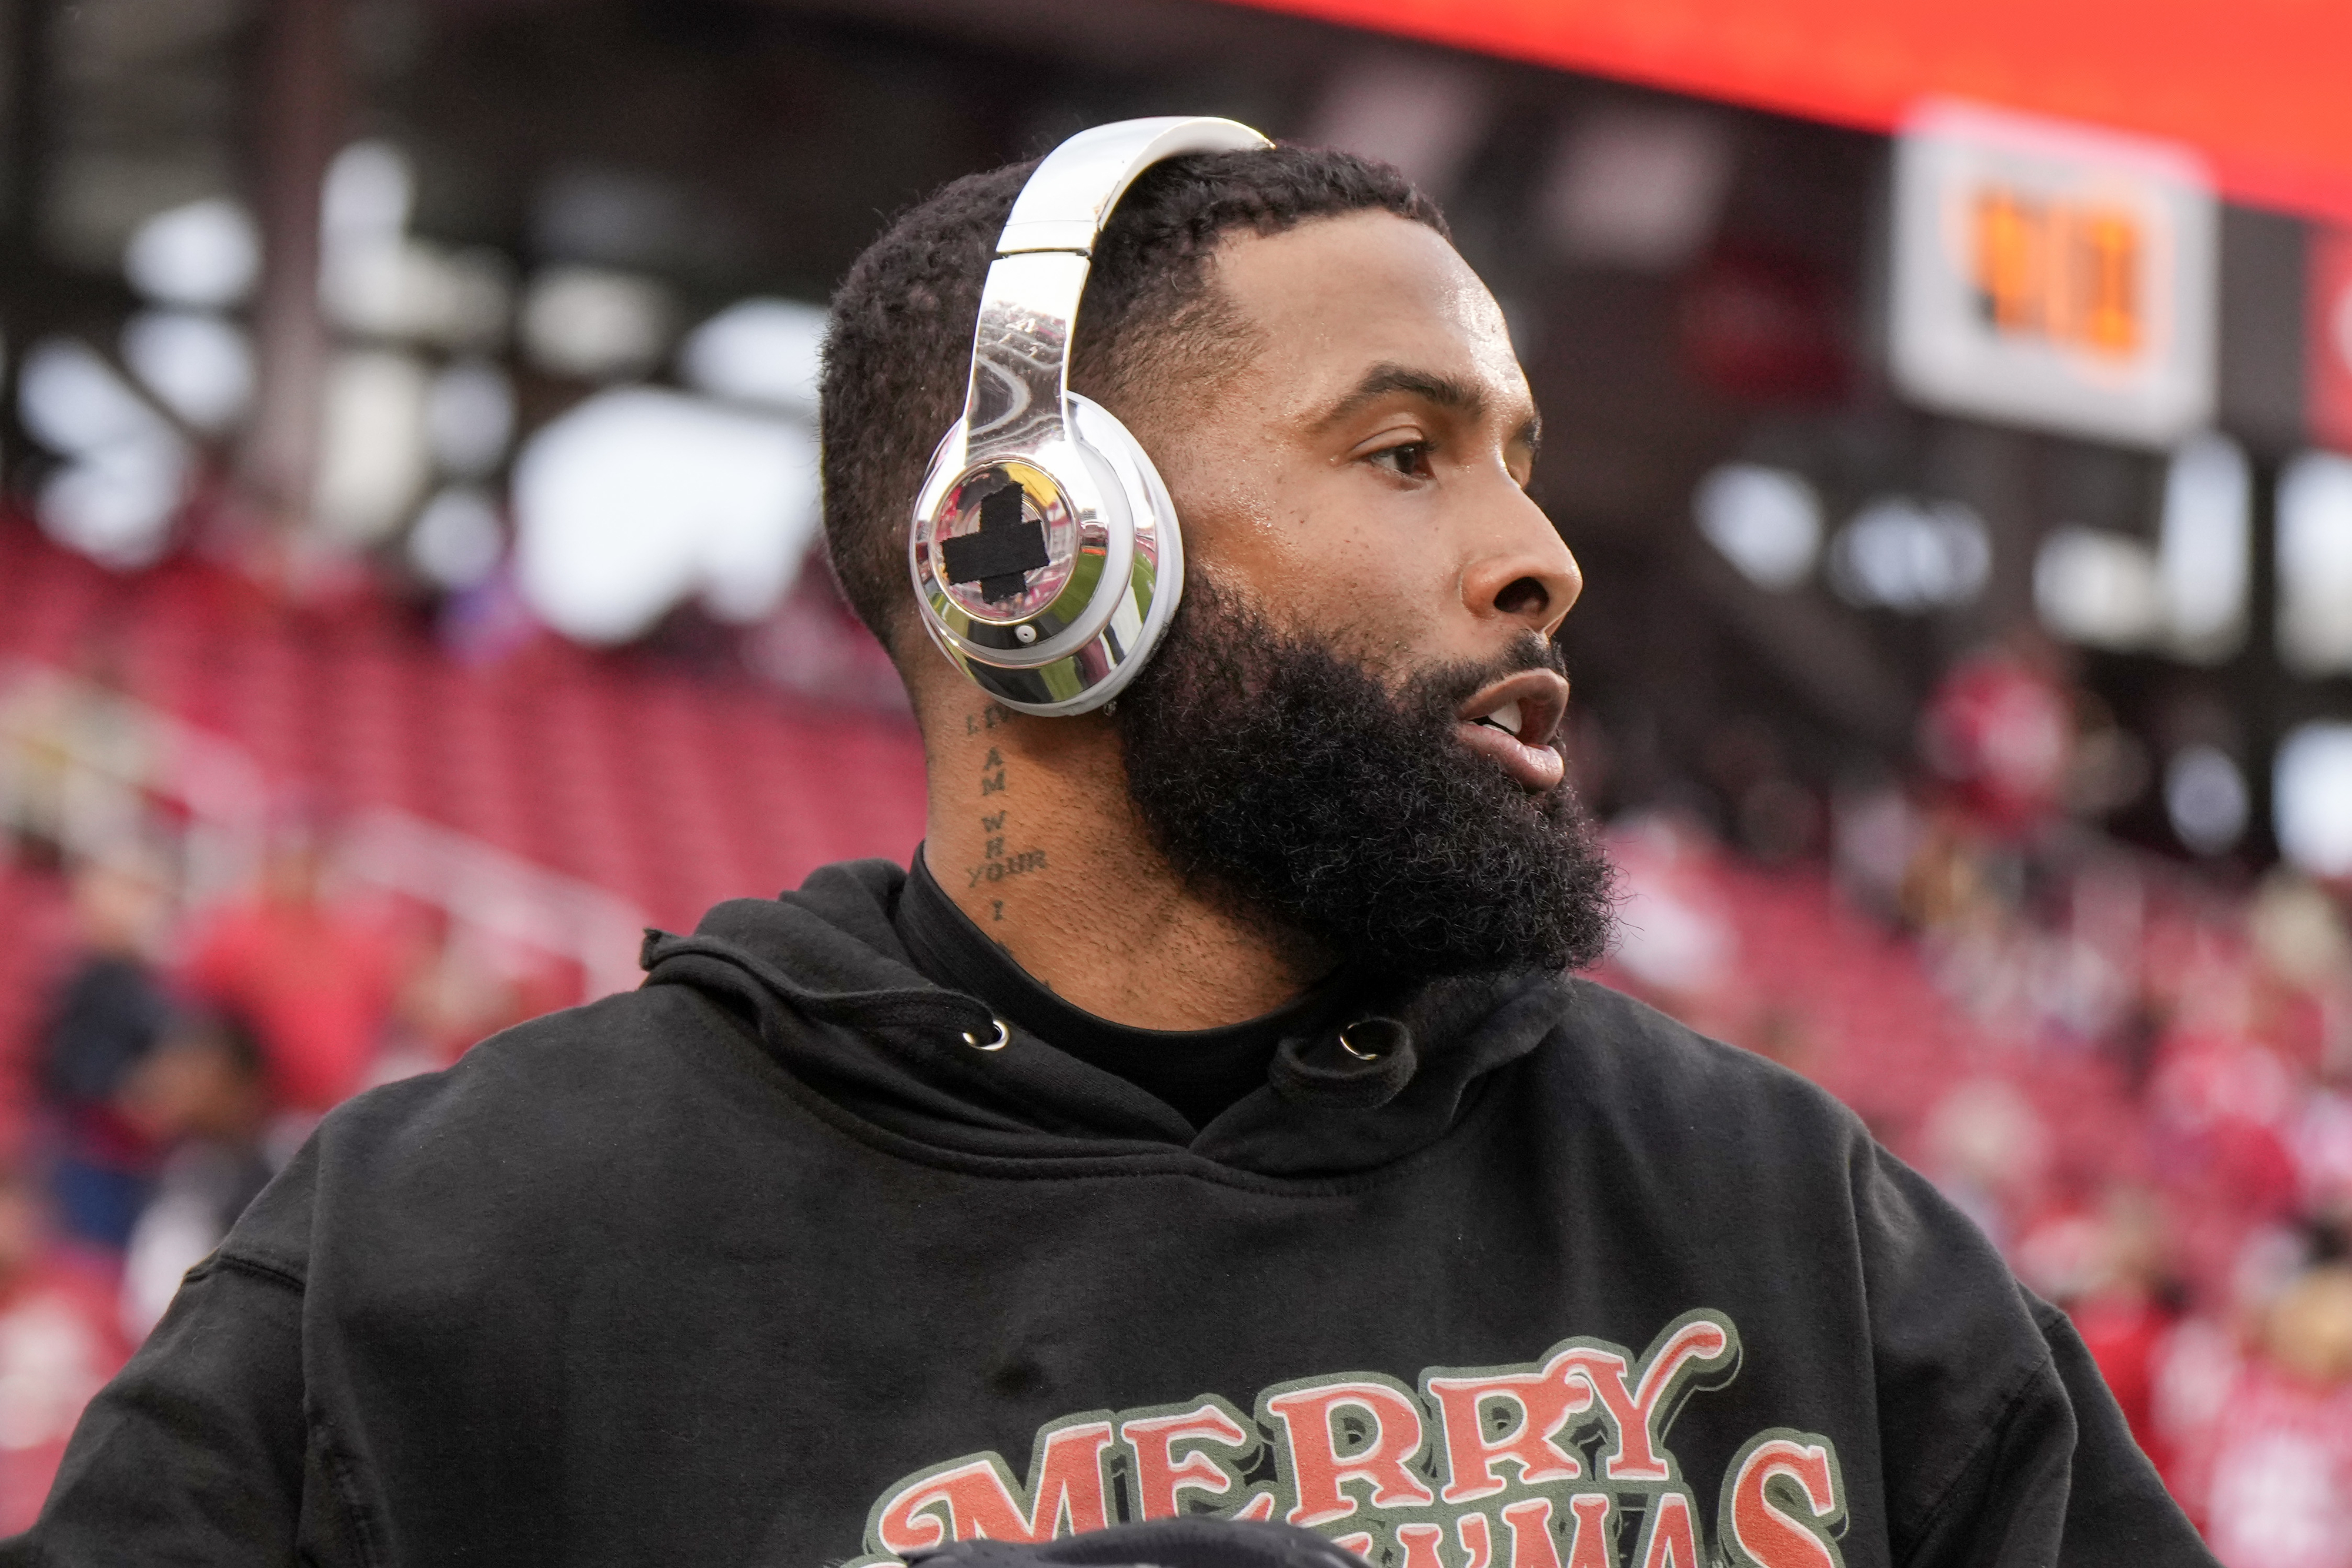 Odell Beckham Jr. wearing a black hoodie and headphones at a sports event